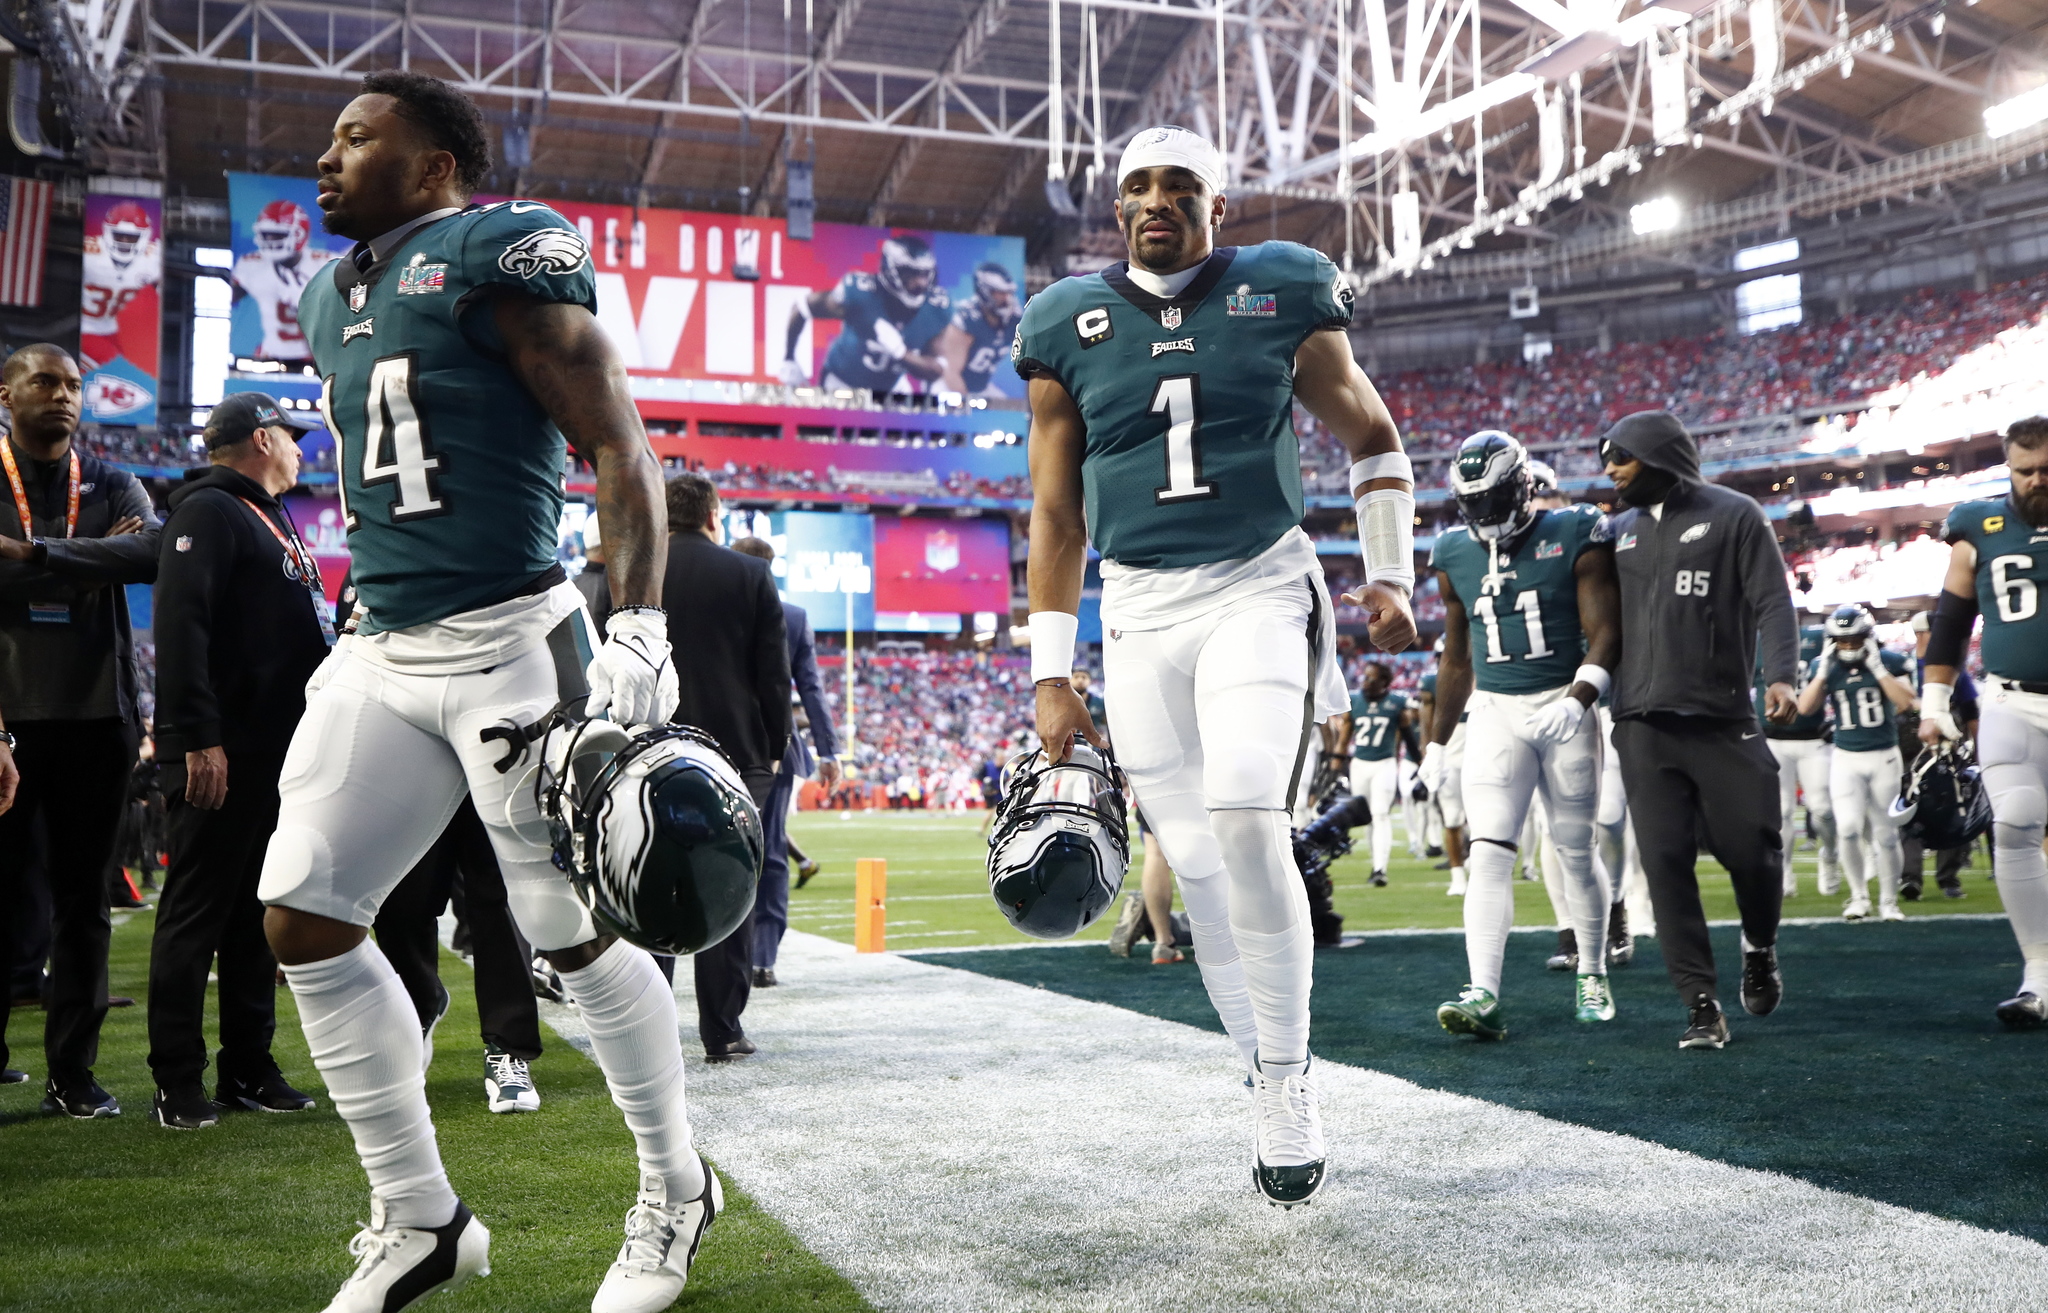 Glendale (United States), 12/02/2023.- Philadelphia Eagles quarterback Jalen Hurts (C) and Philadelphia Eagles running back Kenneth Gainwell (L) leave the field after warm ups on the field prior to the start of  lt;HIT gt;Super lt;/HIT gt;  lt;HIT gt;Bowl lt;/HIT gt; LVII between the AFC champion Kansas City Chiefs and the NFC champion Philadelphia Eagles at State Farm Stadium in Glendale, Arizona, 12 February 2023. The annual  lt;HIT gt;Super lt;/HIT gt;  lt;HIT gt;Bowl lt;/HIT gt; is the Championship game of the NFL between the AFC Champion and the NFC Champion and has been held every year since January of 1967. (Estados Unidos, Filadelfia) EFE/EPA/CAROLINE BREHMAN